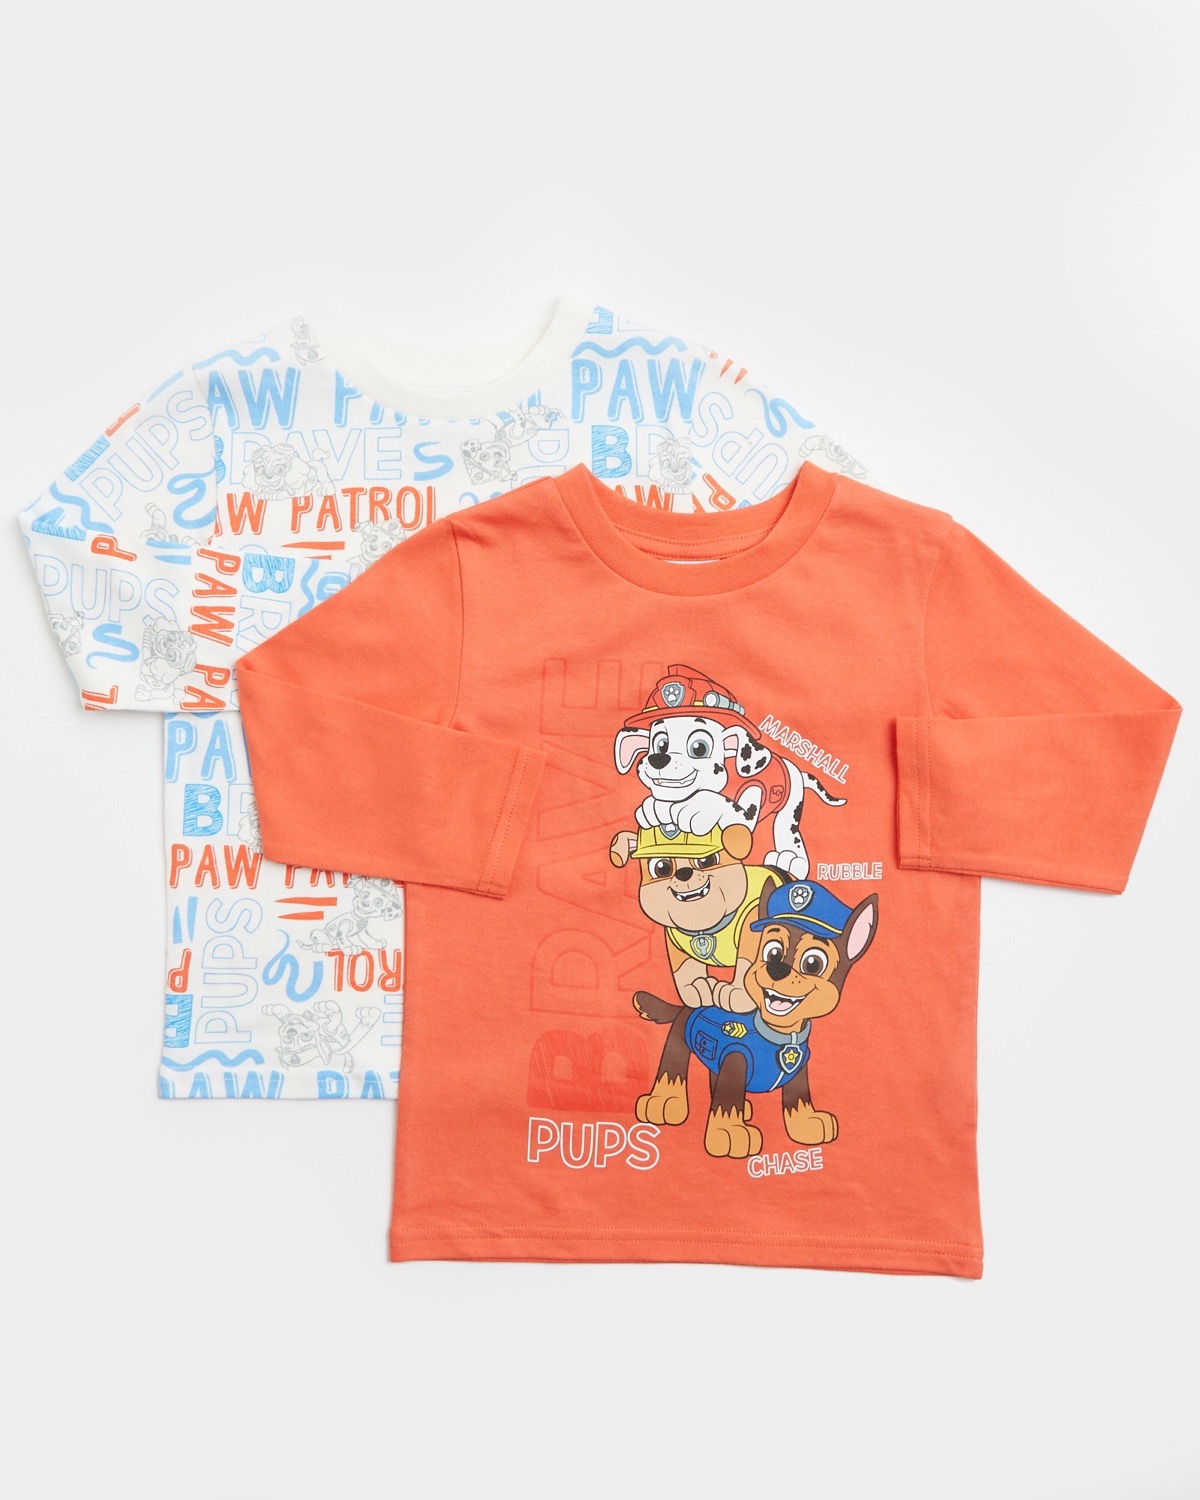 Dunnes Stores | Red Paw Patrol Tops - Pack Of 2 (12 months-5 years)